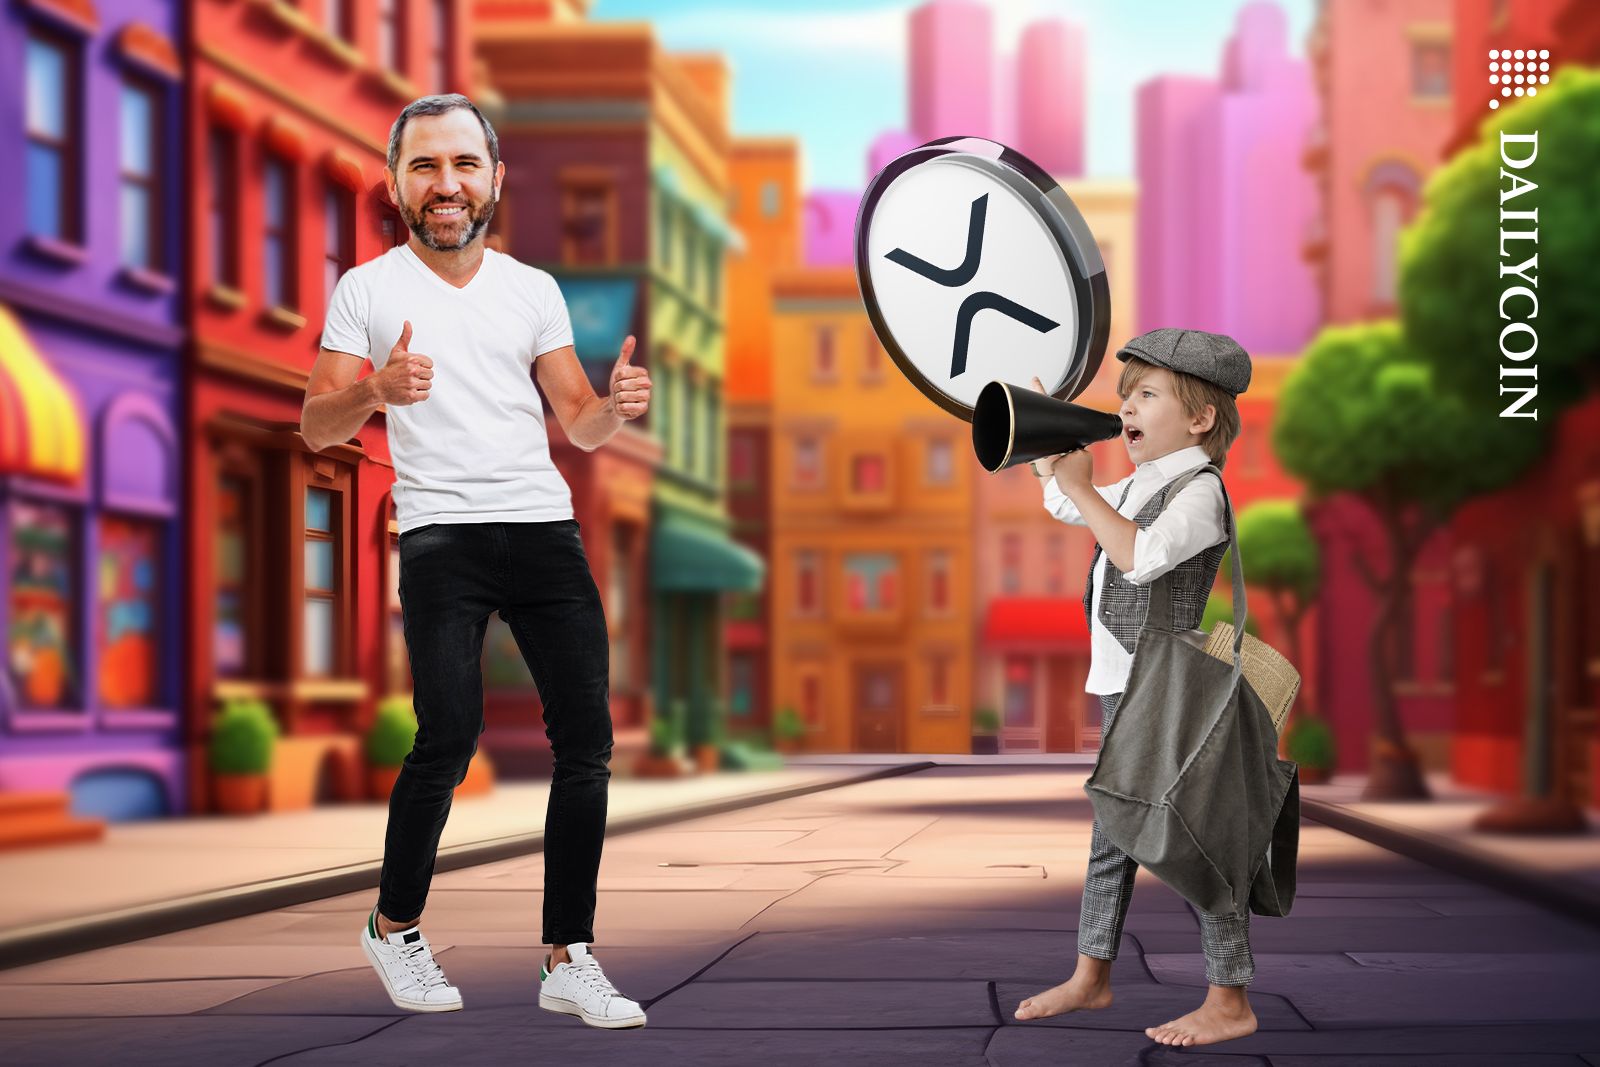 News boy spreading the word on the street for XRP, Brad Garlinghouse is happy.